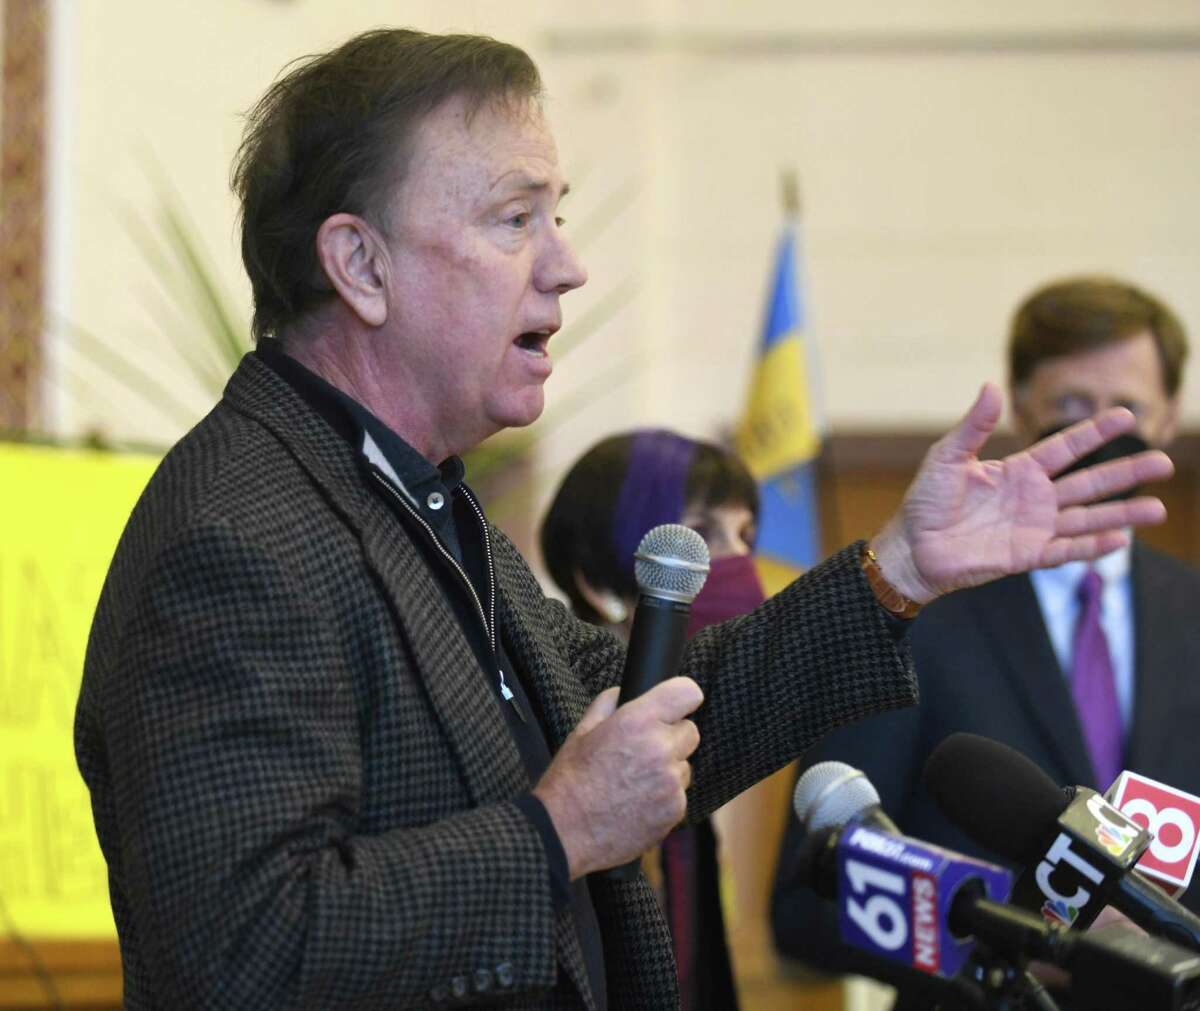 Connecticut Gov. Ned Lamont speaks at the Ukraine press conference and rally at St. Michael the Archangel Ukrainian Catholic Church in New Haven, Conn., Sunday, Feb. 27, 2022.